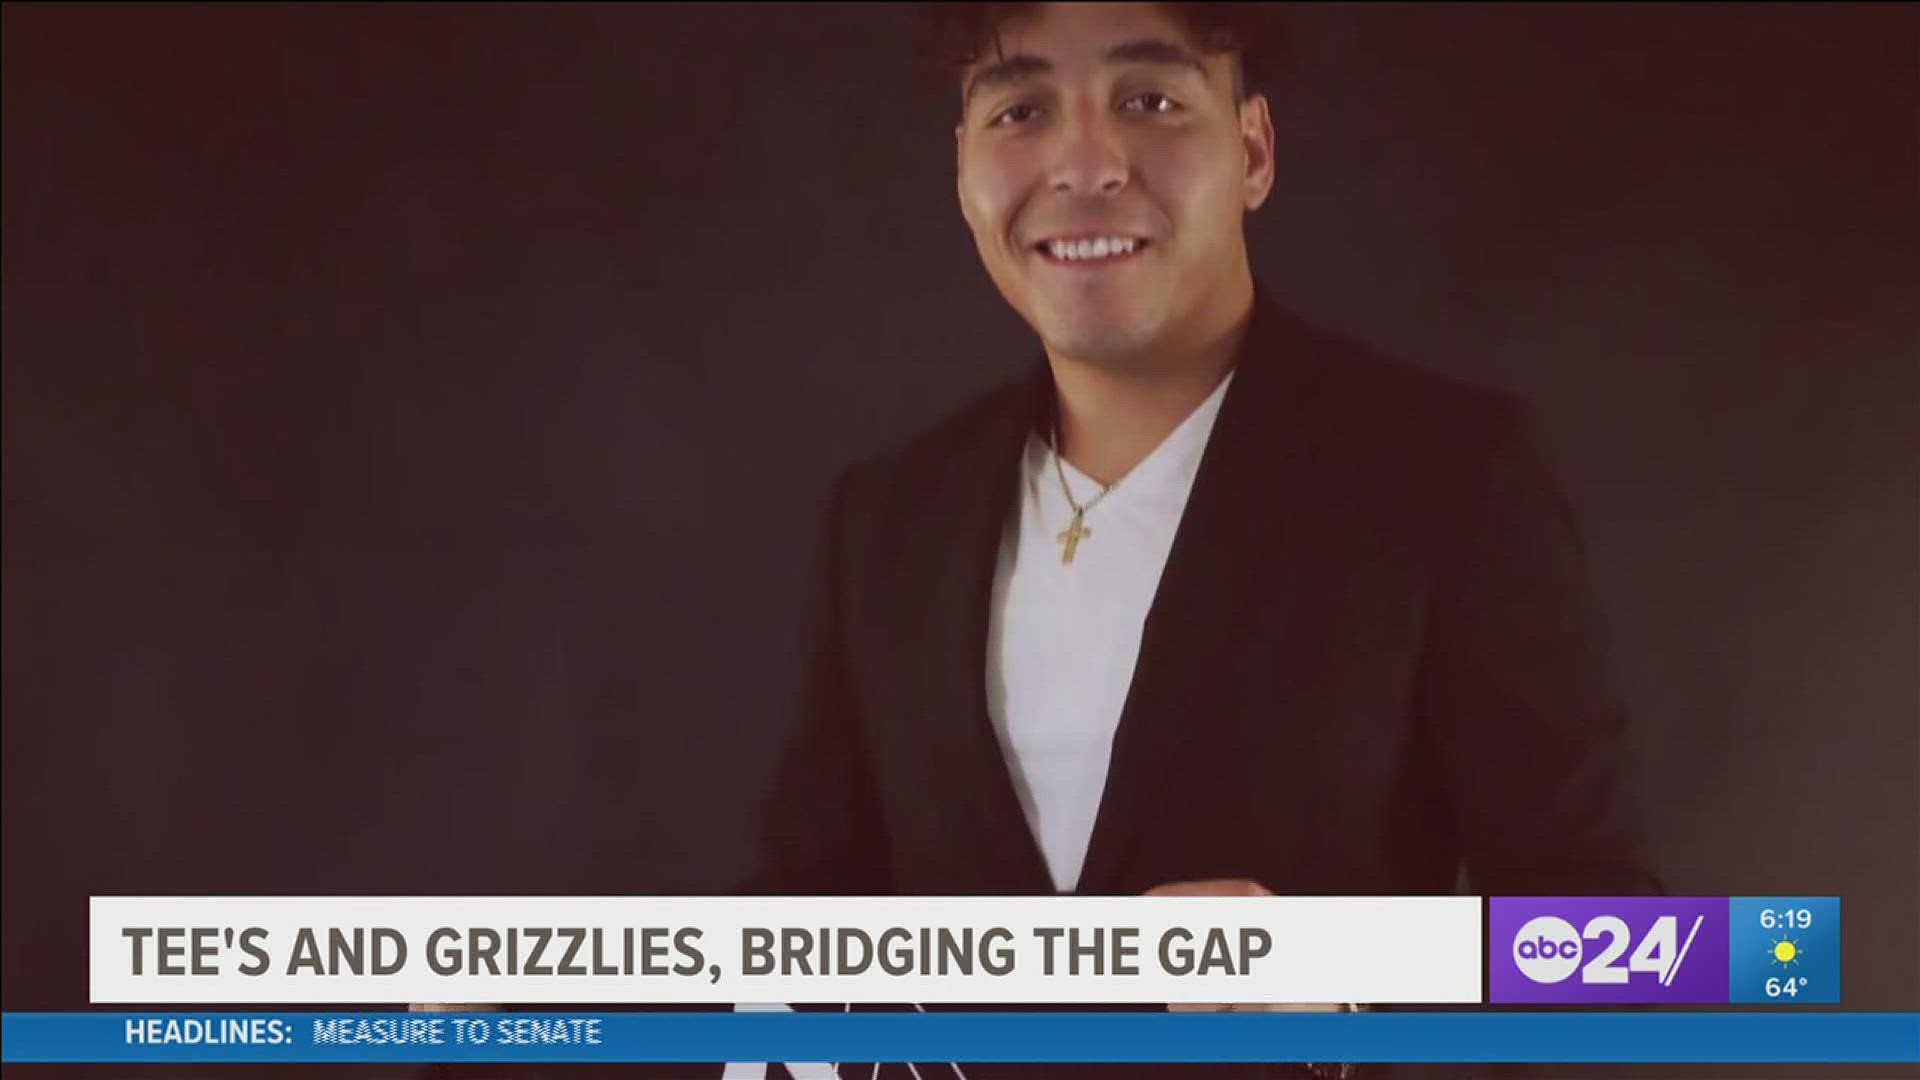 Victor Ivan gives away free tee shirts and Grizzlies tickets to promote inclusion